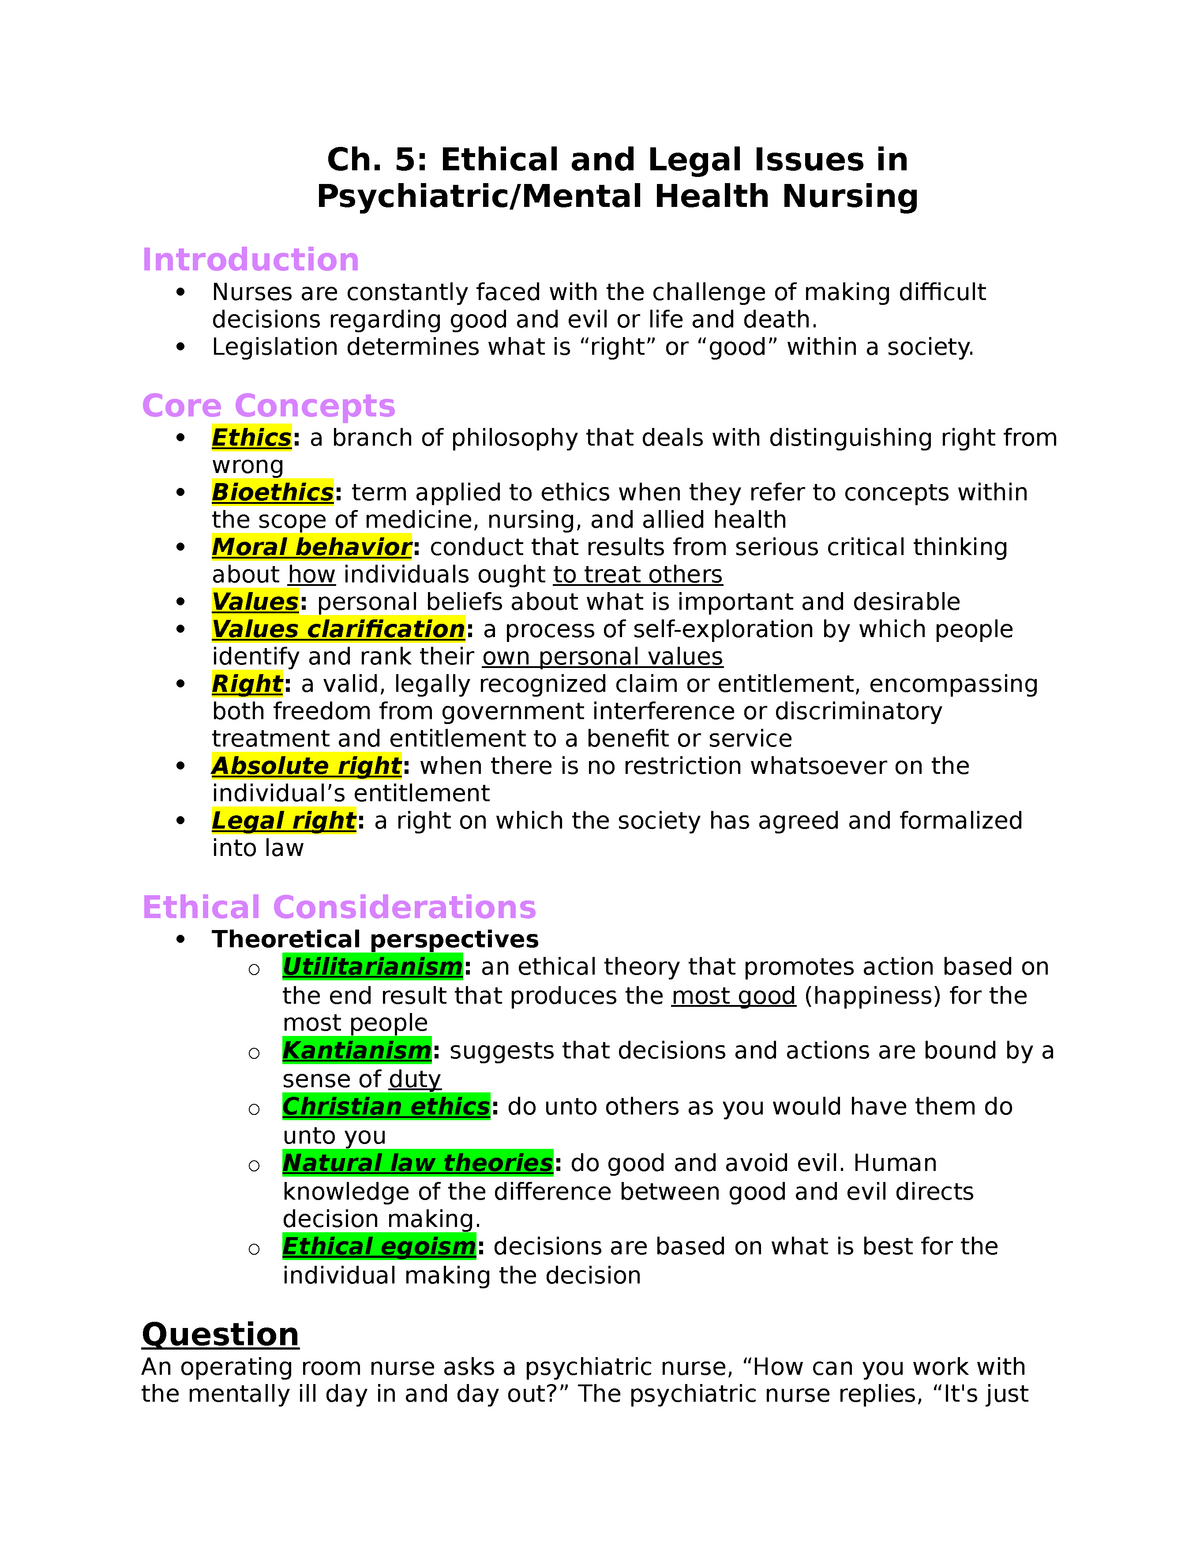 legal and ethical issues in mental health nursing essay